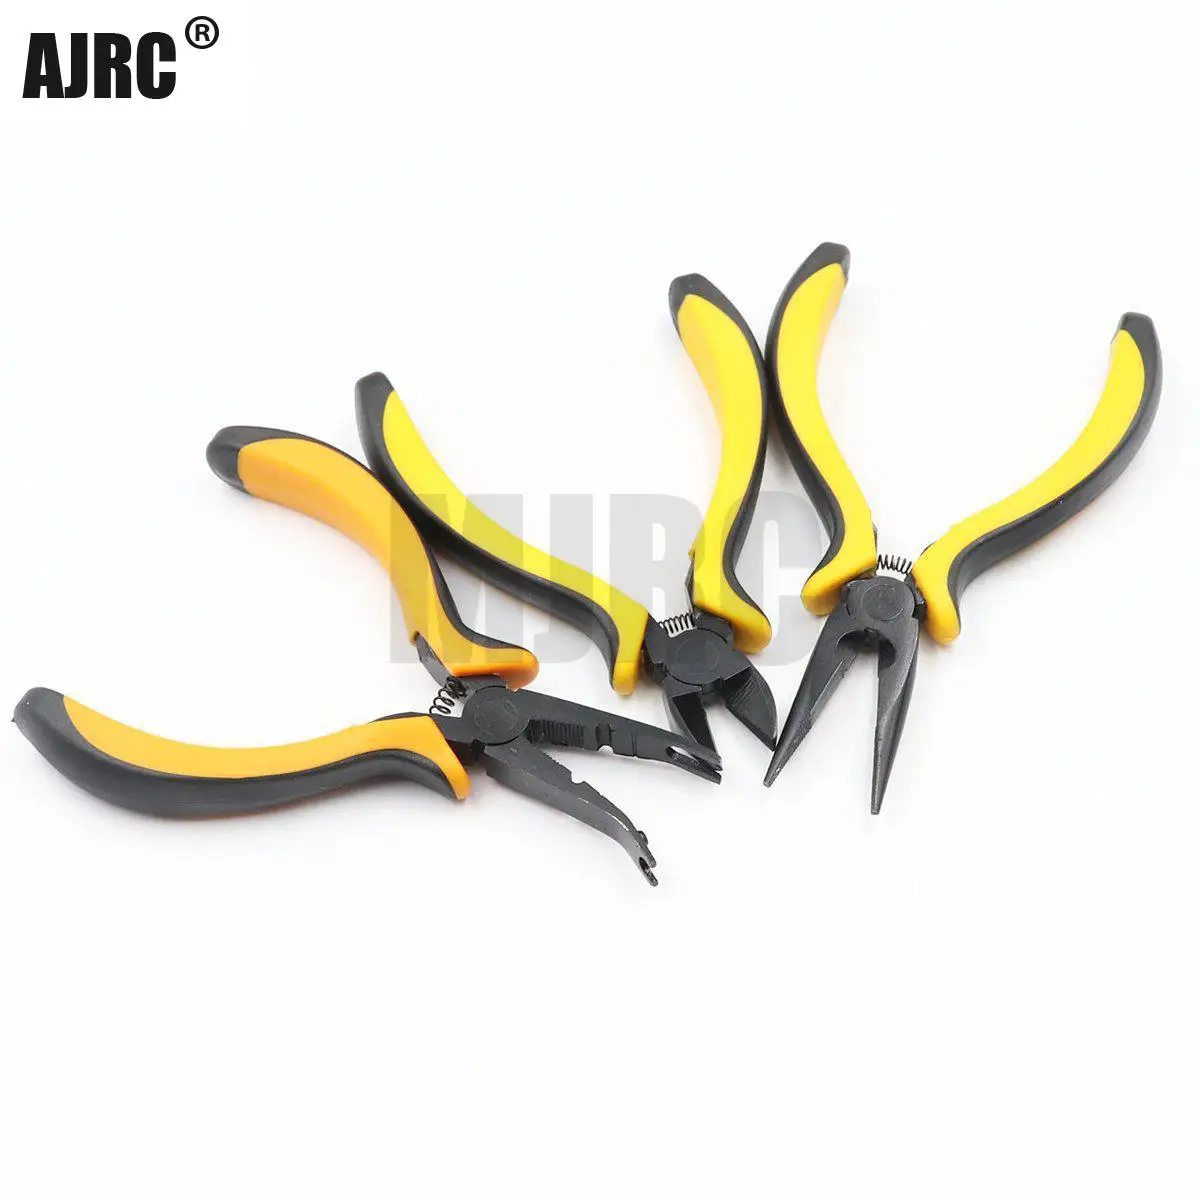 

High Quality Ball Link Plier Helicopter Airplane Car Repair Tool Kit Tool For RC Toy Model Long nose pliers Oblique head shear